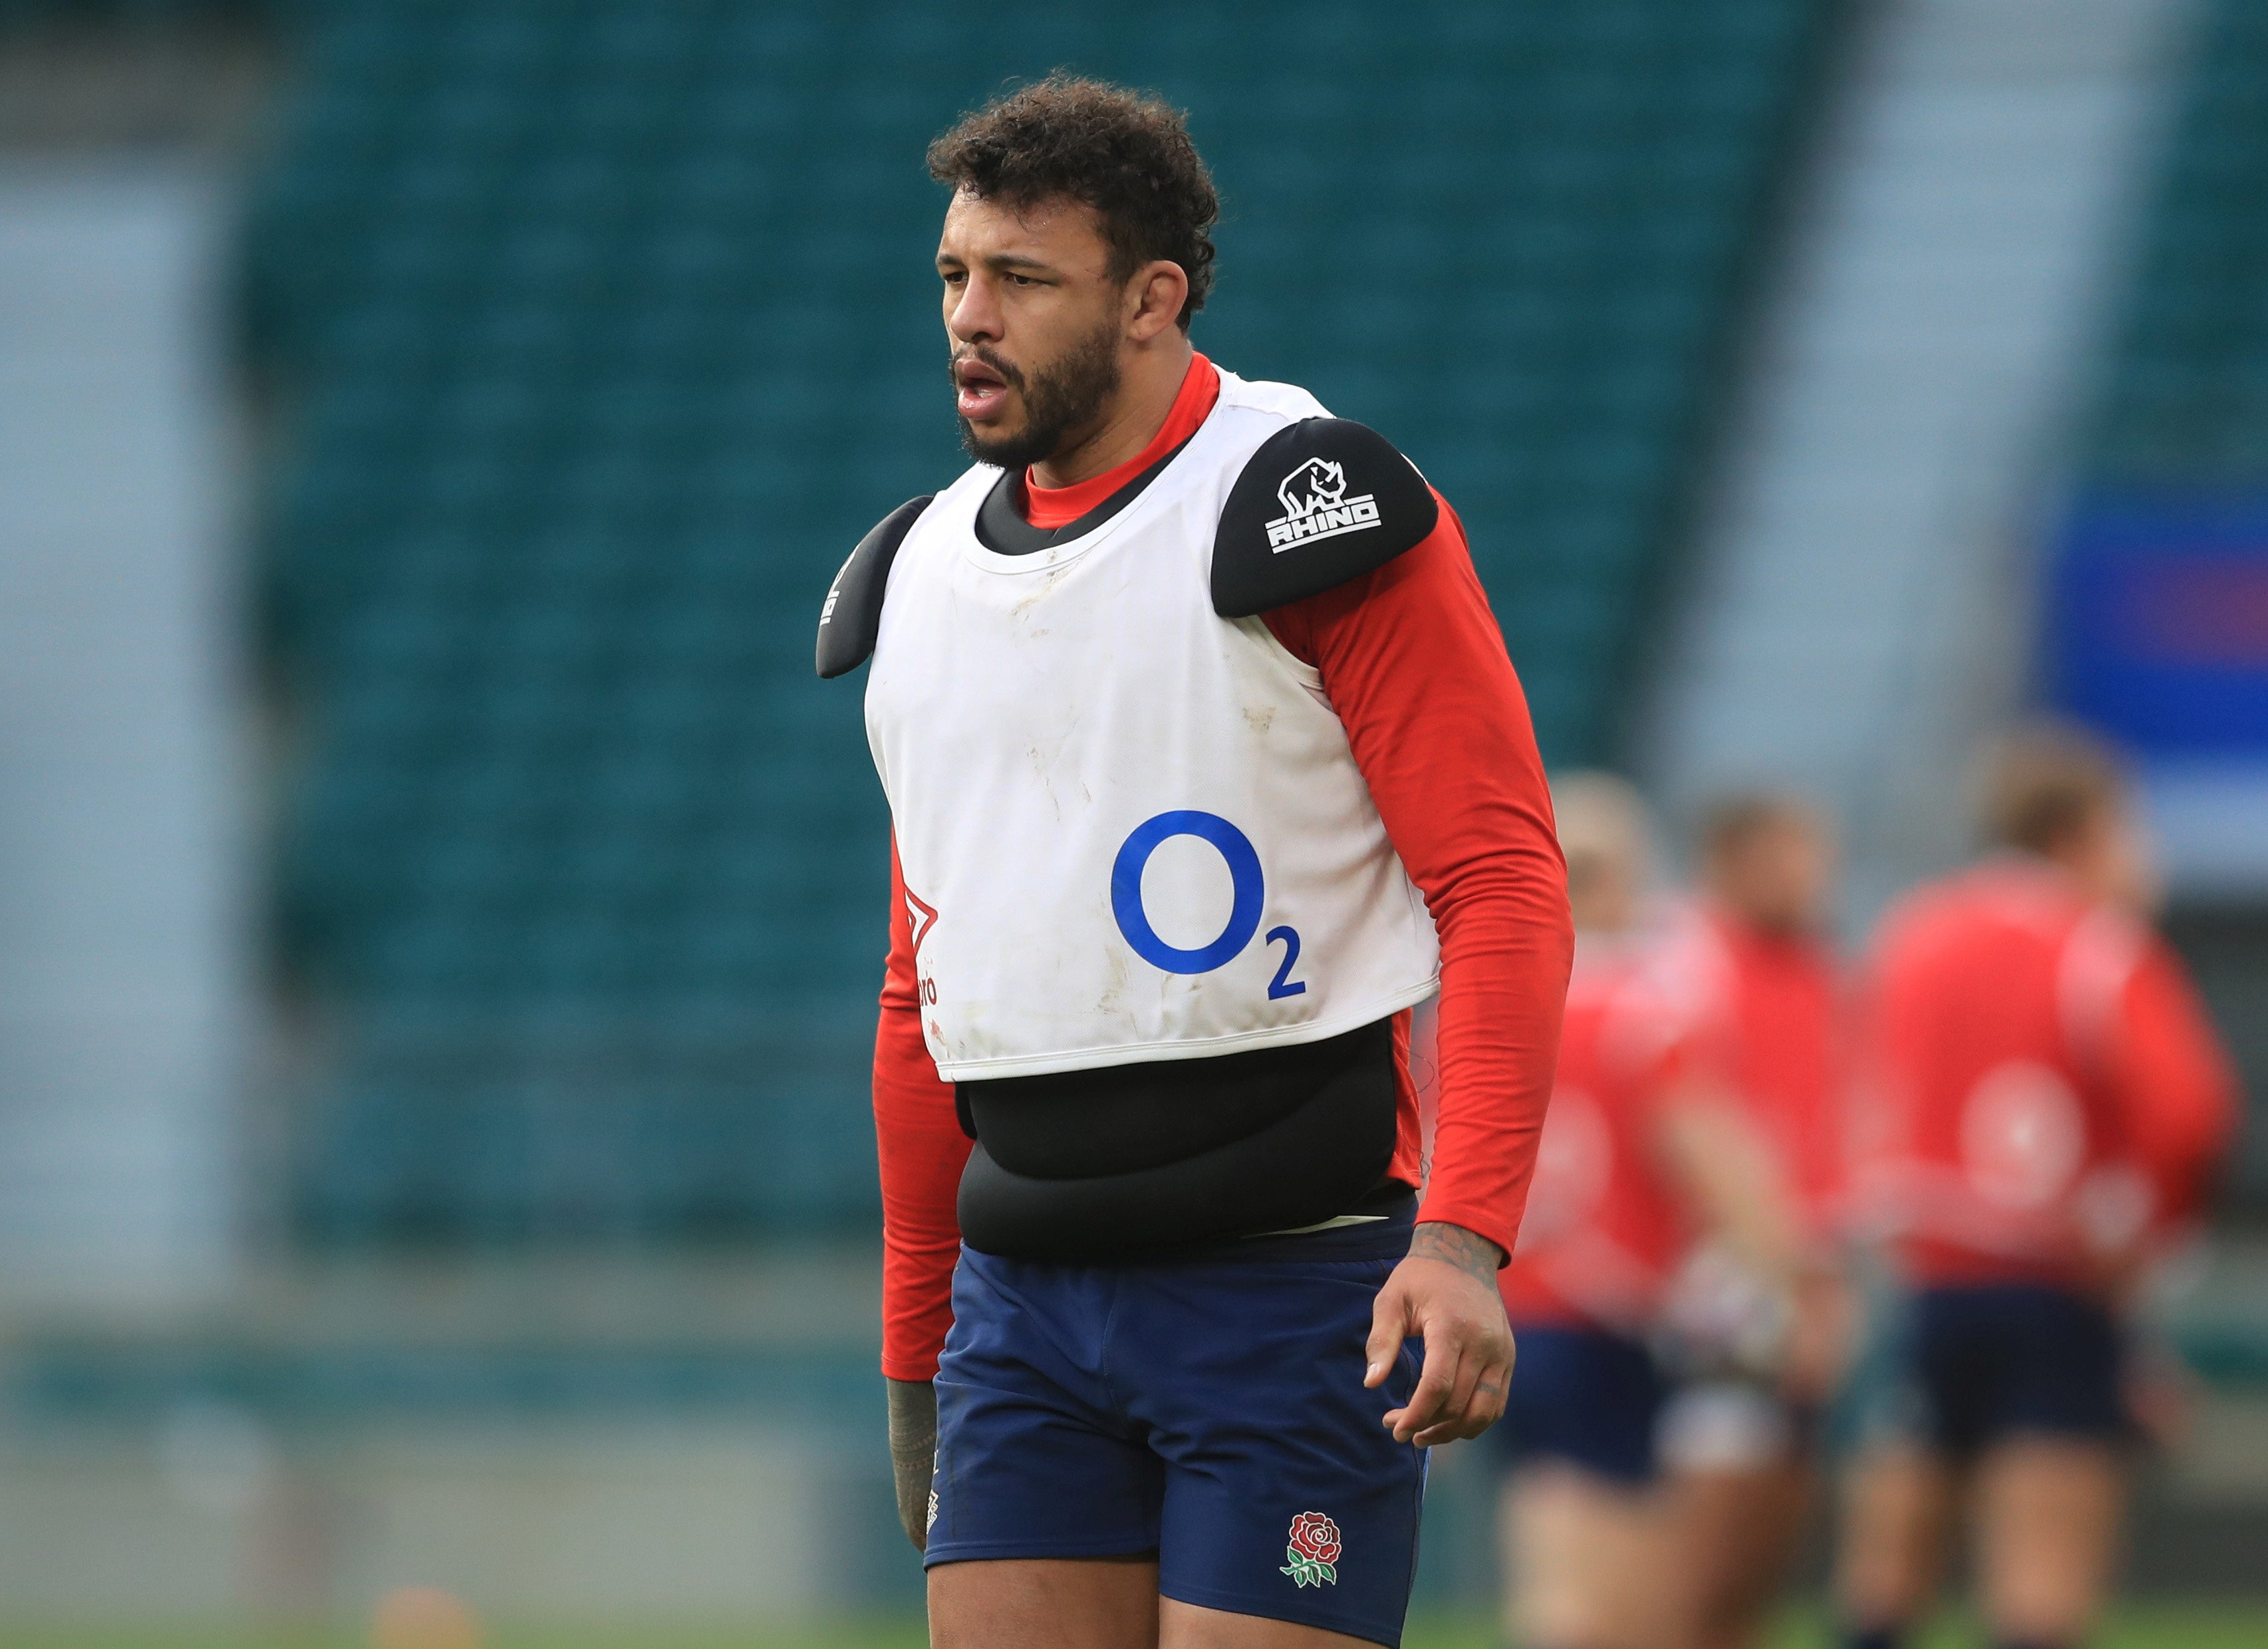 Courtney Lawes will play no more part in the Six Nations